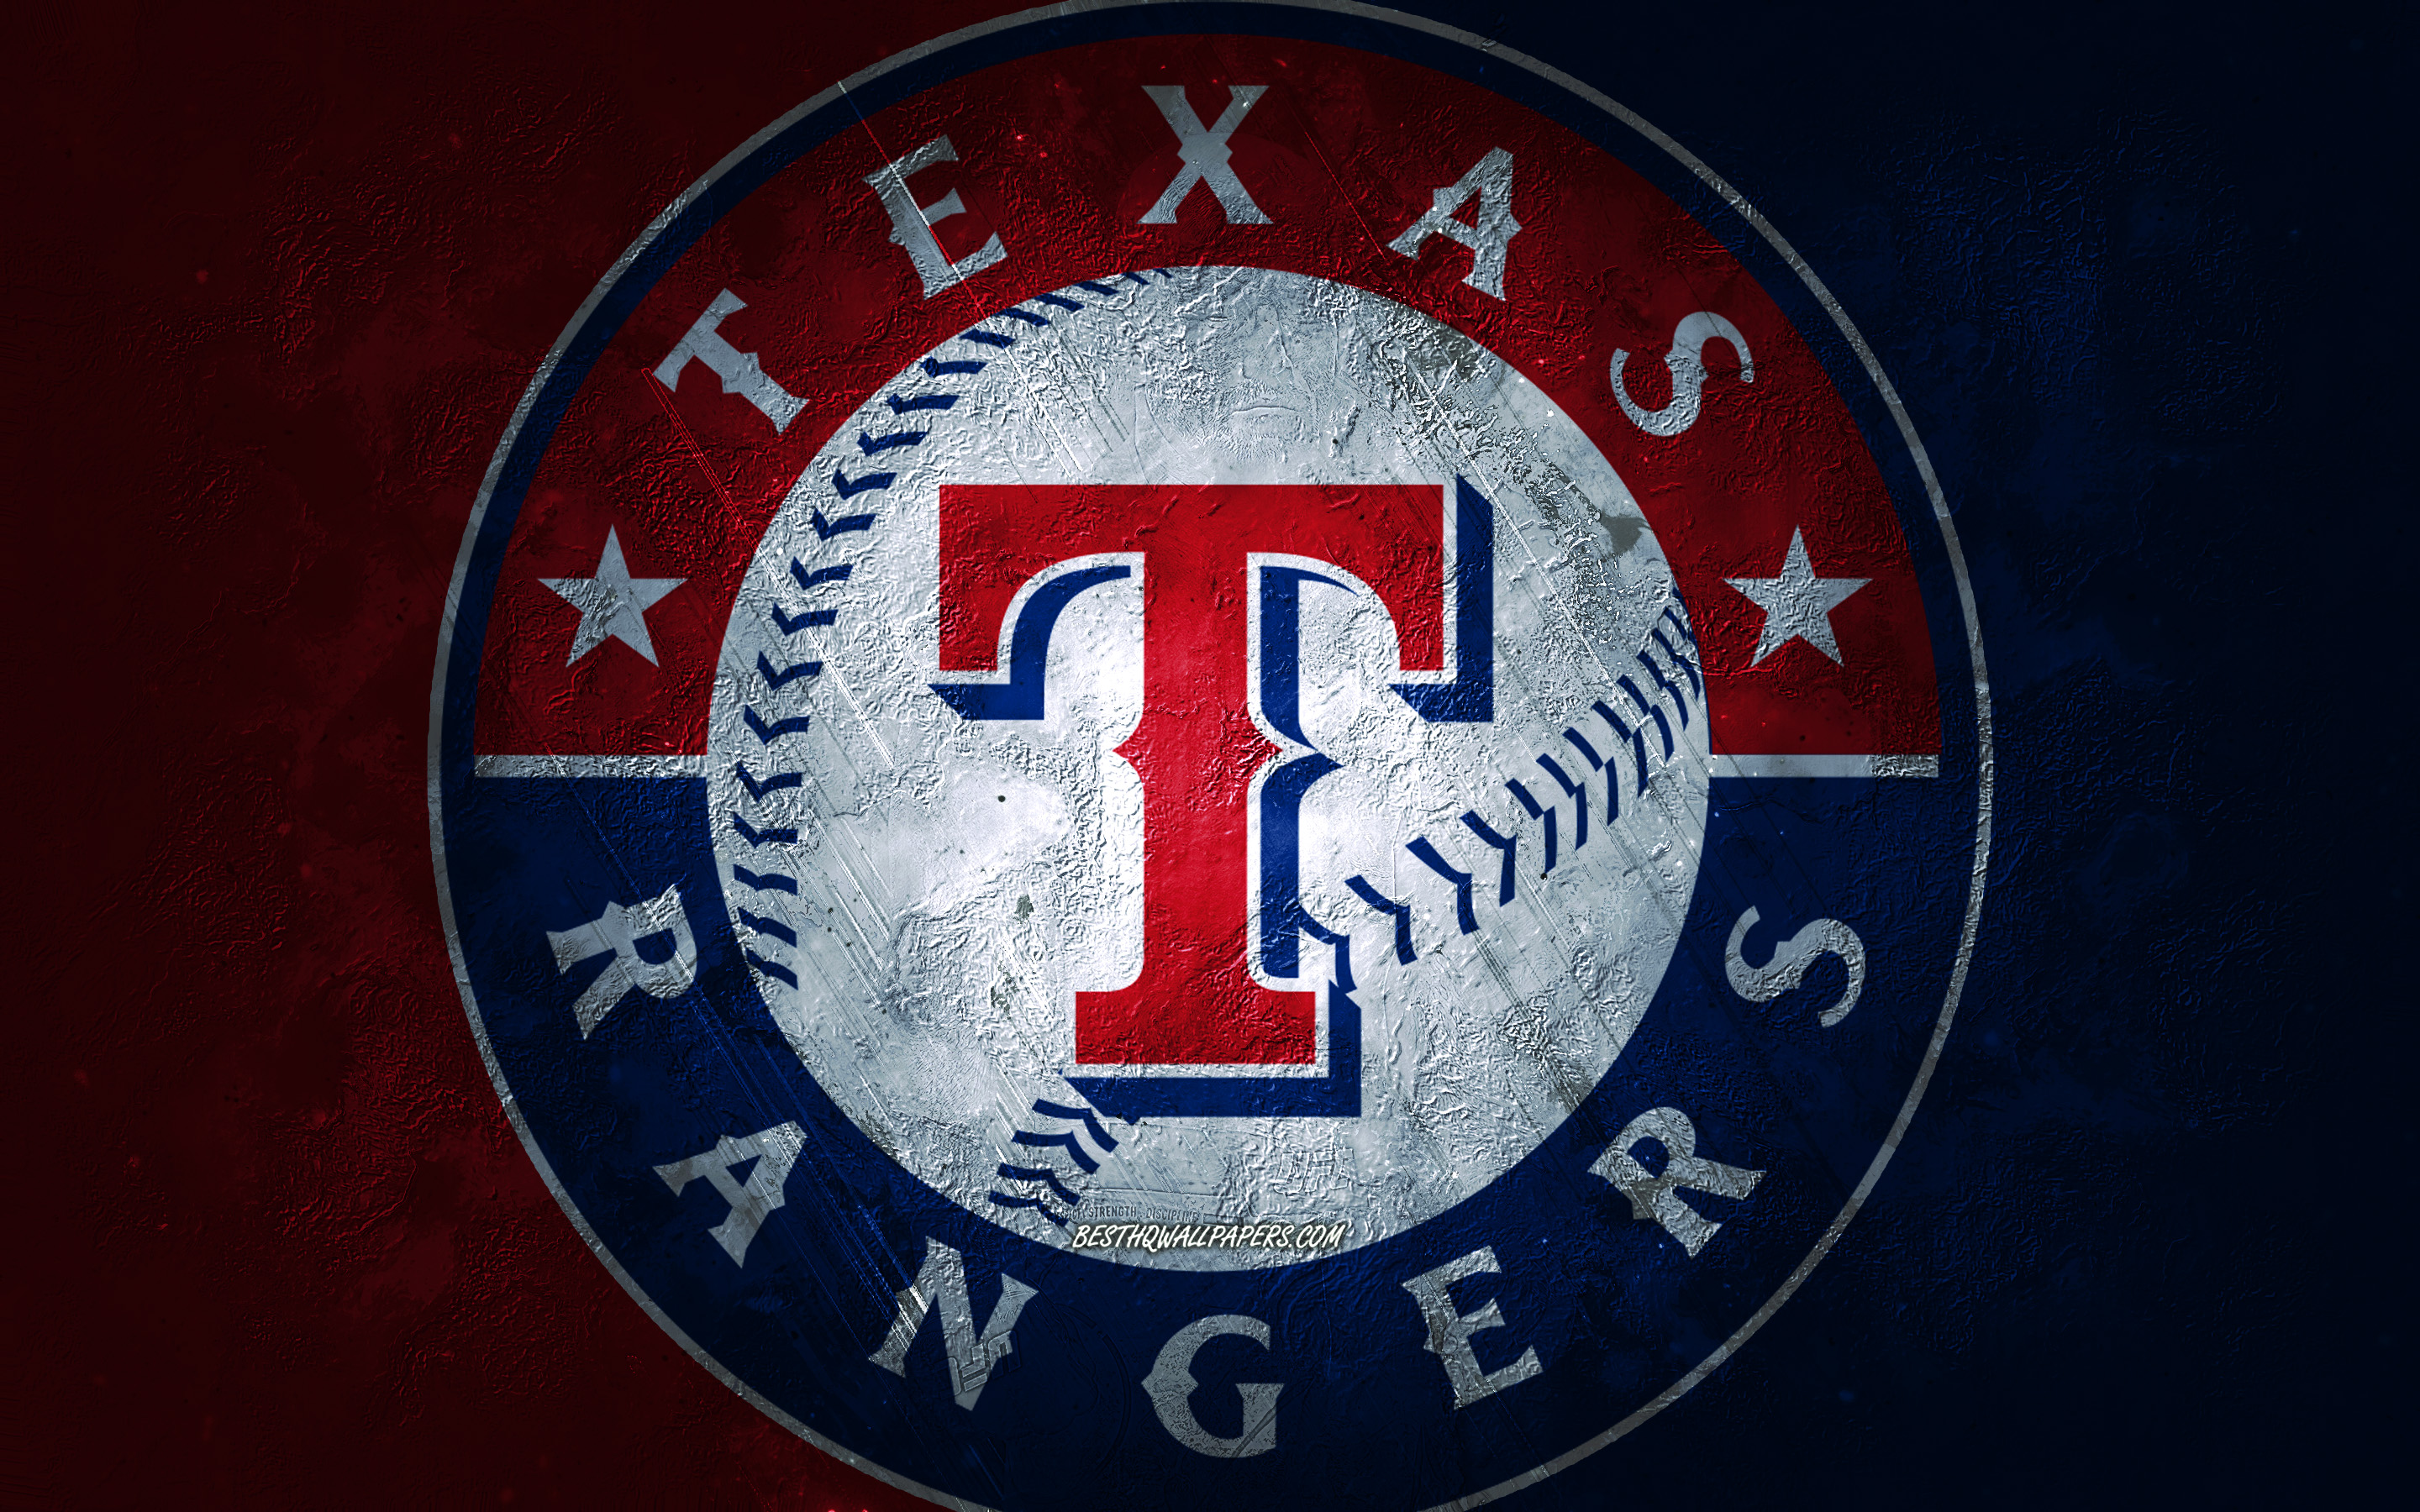 Download wallpapers Texas Rangers, American baseball team, blue red